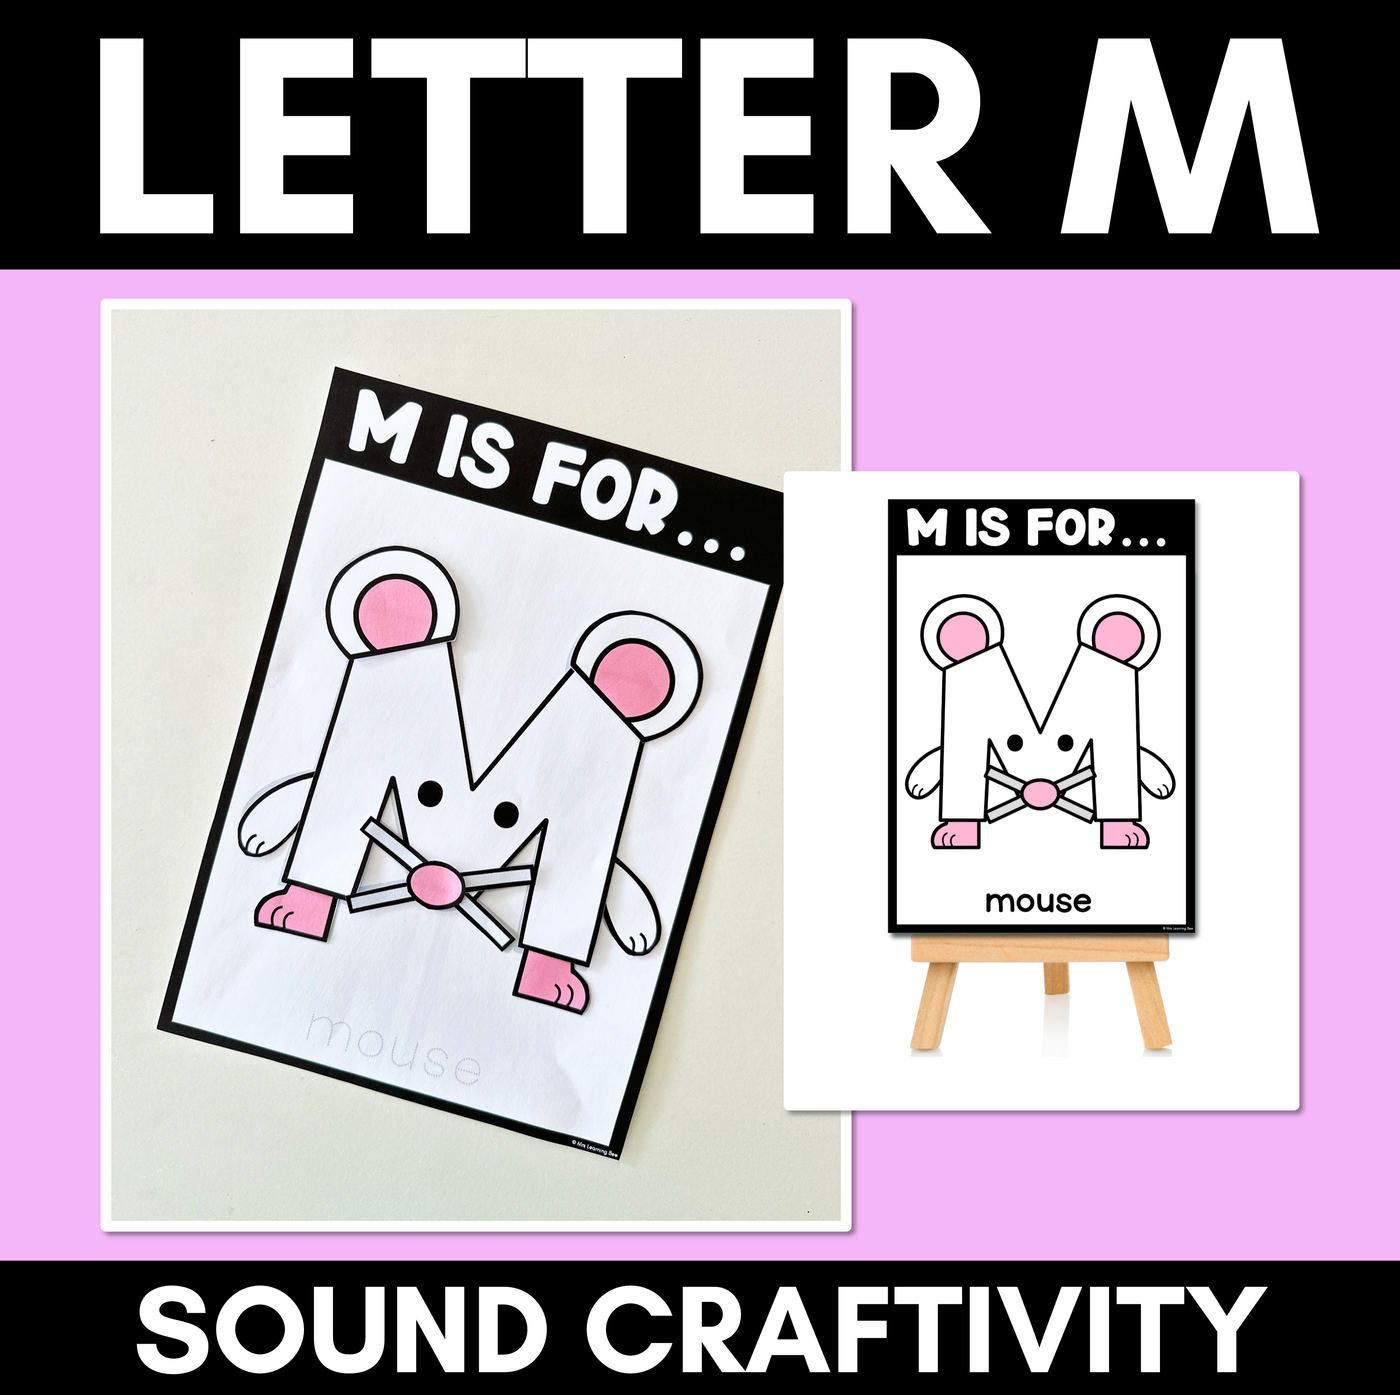 Beginning Sound Crafts - Letter M - M is for Mouse